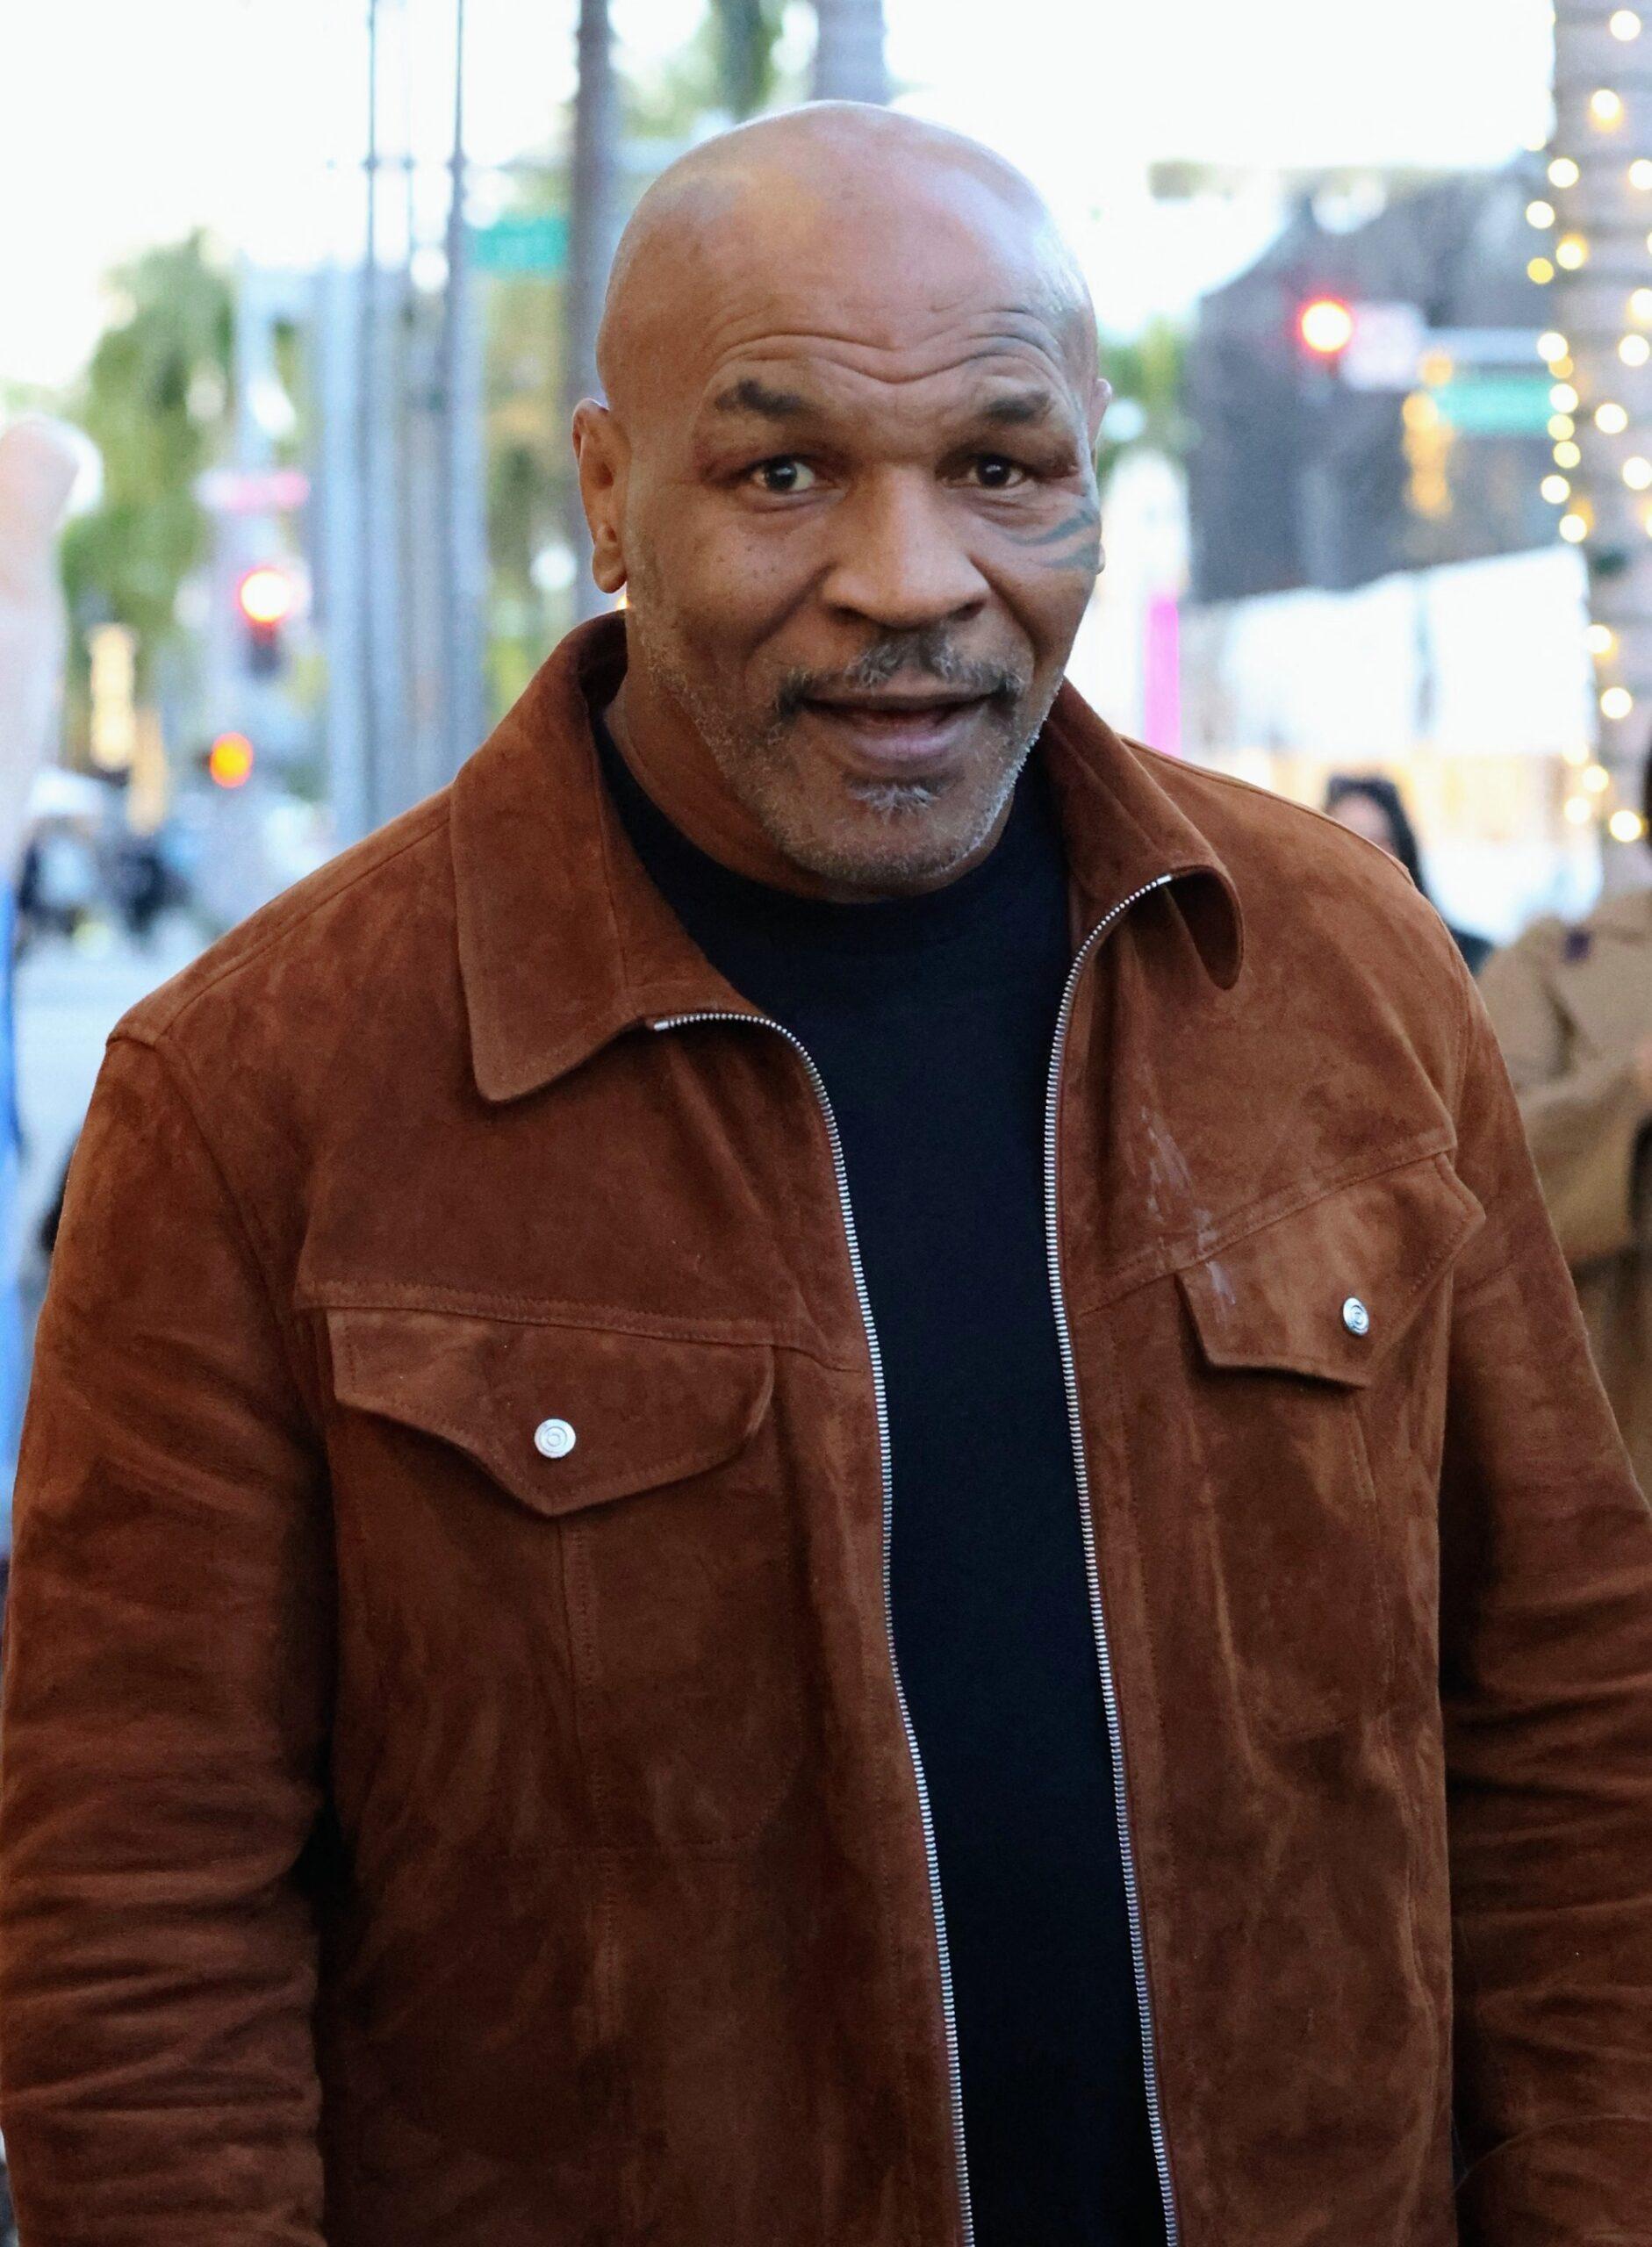 Mike Tyson seen greeting fans on Rodeo Drive after shopping FerragamoMike Tyson seen greeting fans on Rodeo Drive after shopping Ferragamo